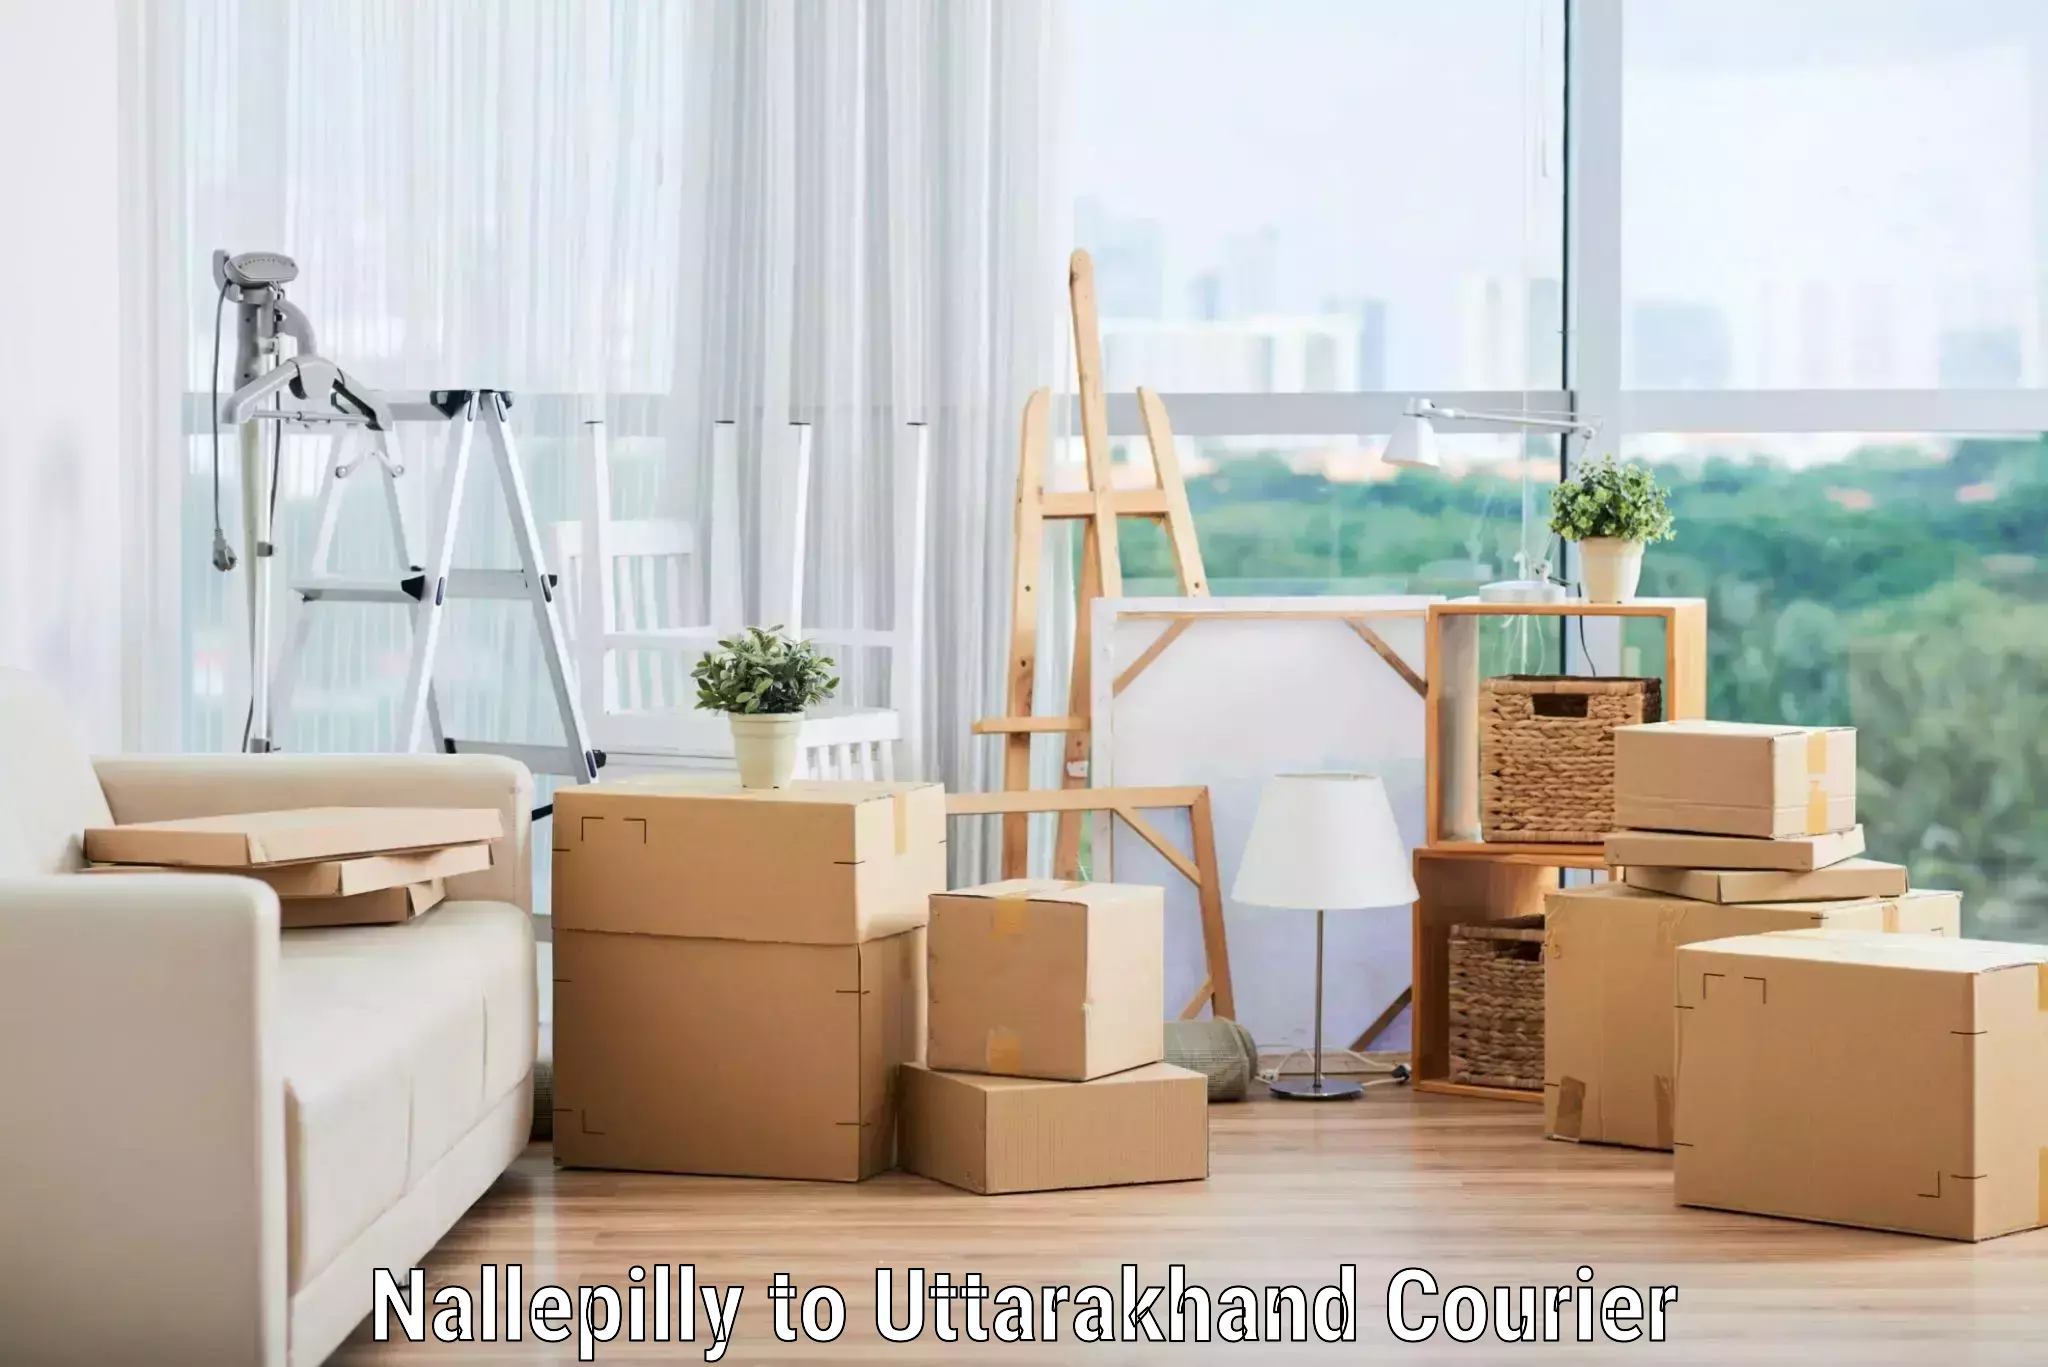 Affordable relocation services Nallepilly to Bageshwar